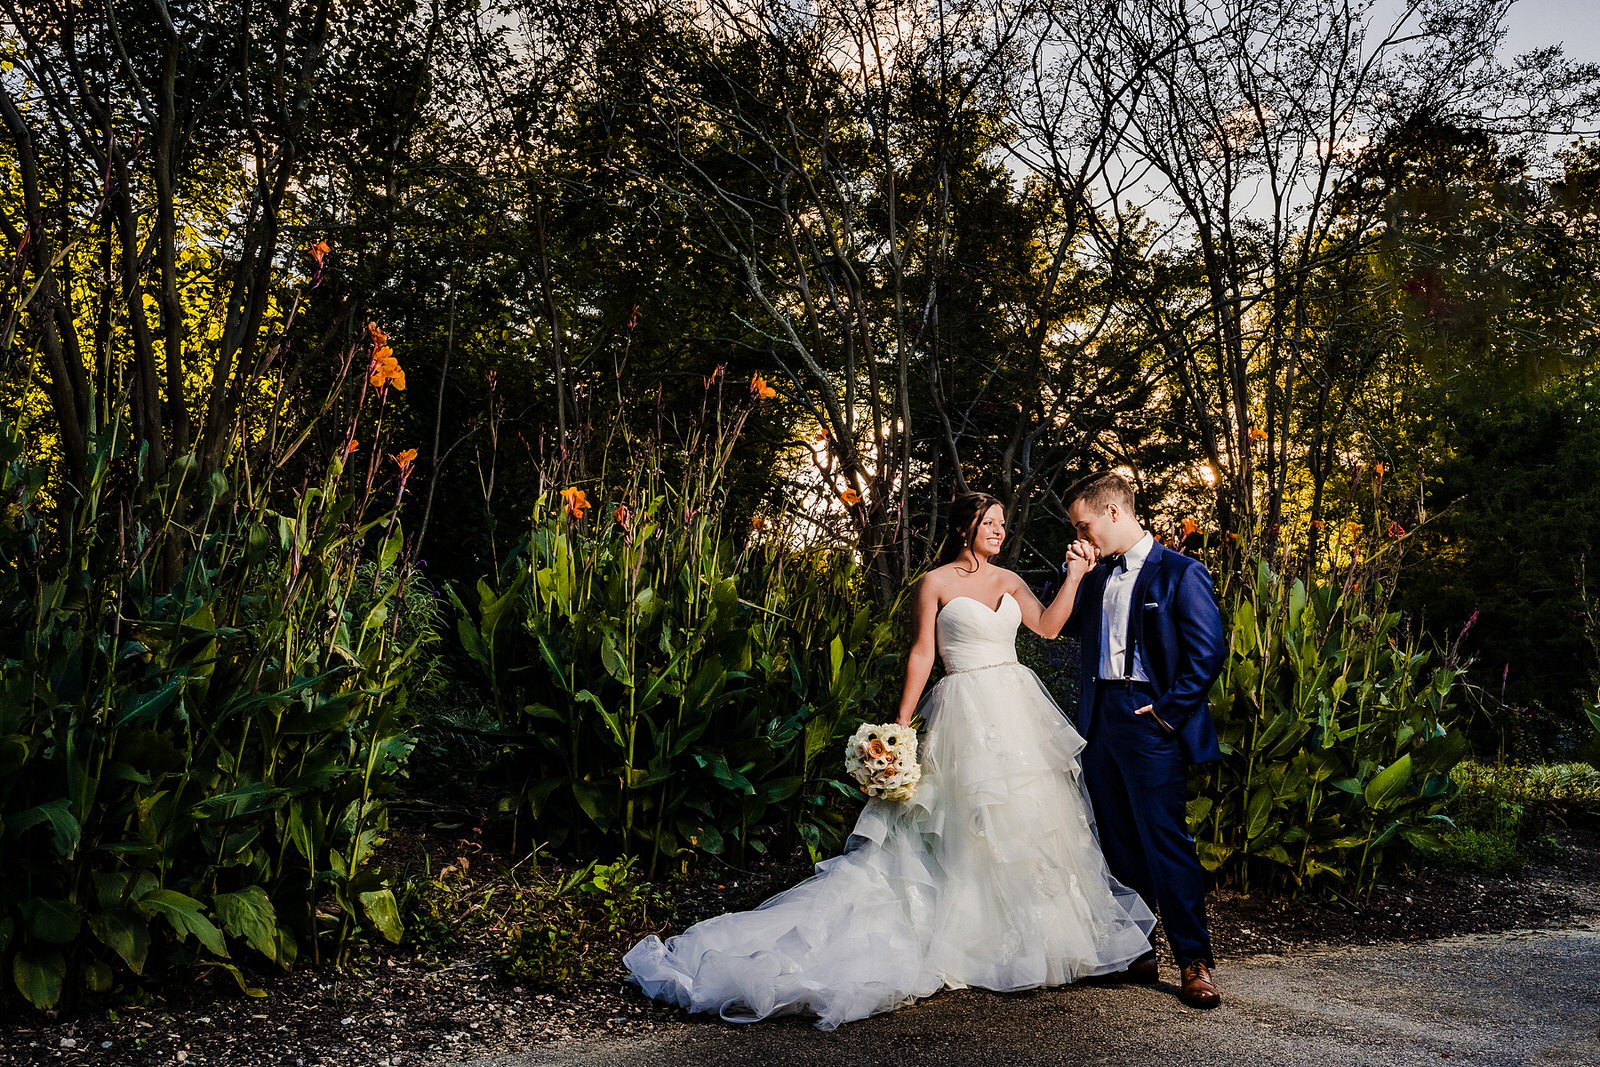 Pullen Park Wedding Photos - great location for wedding portraits in Raleigh, NC